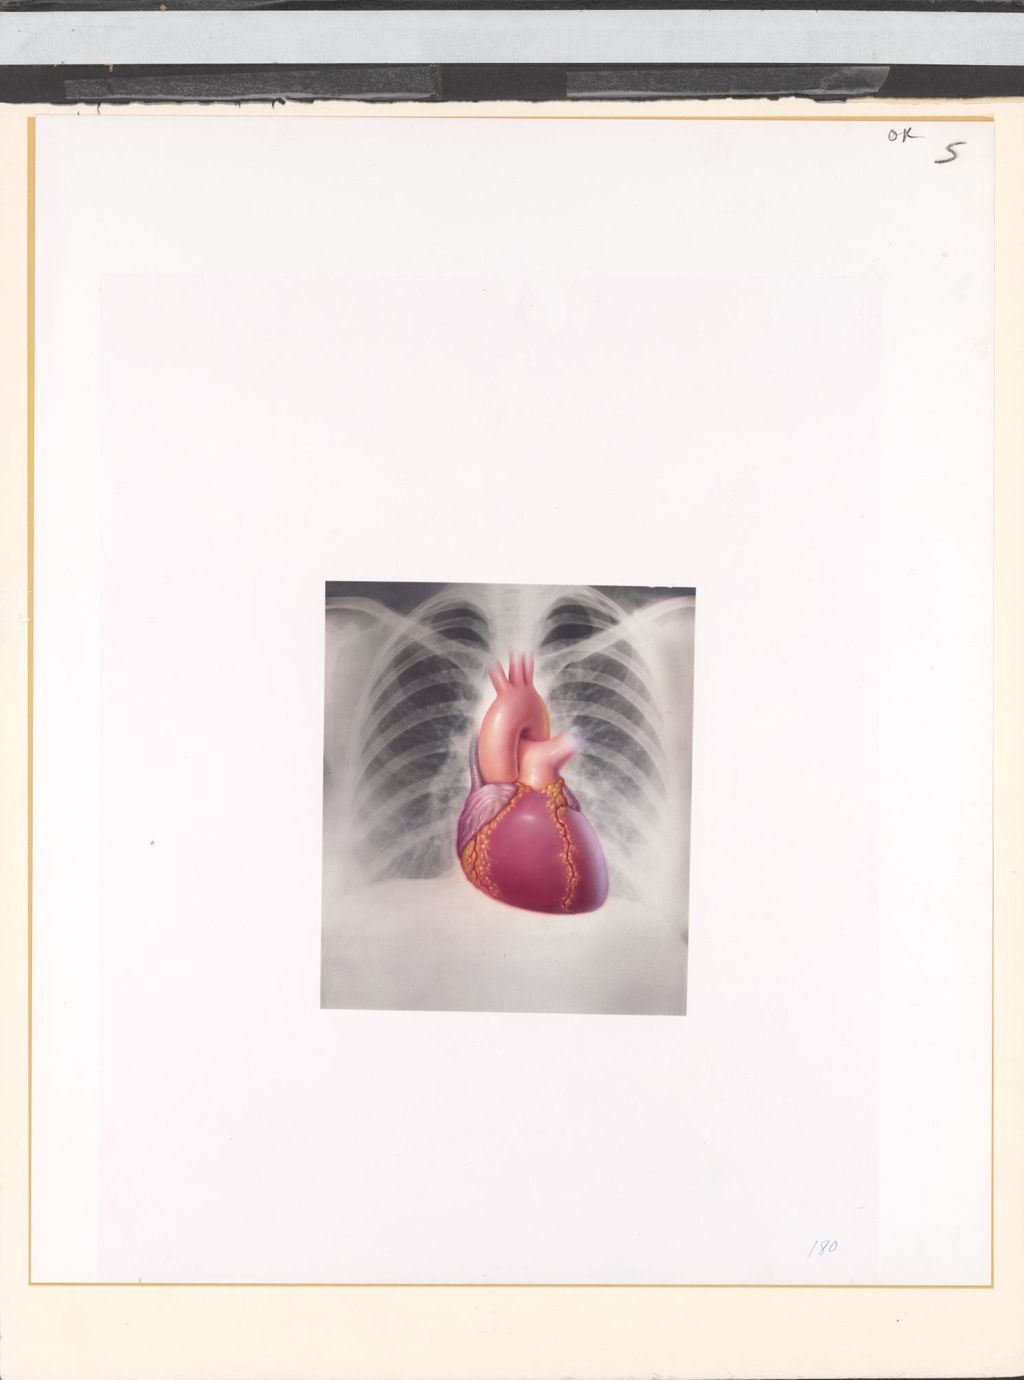 Miniature of Heart with chest x-ray